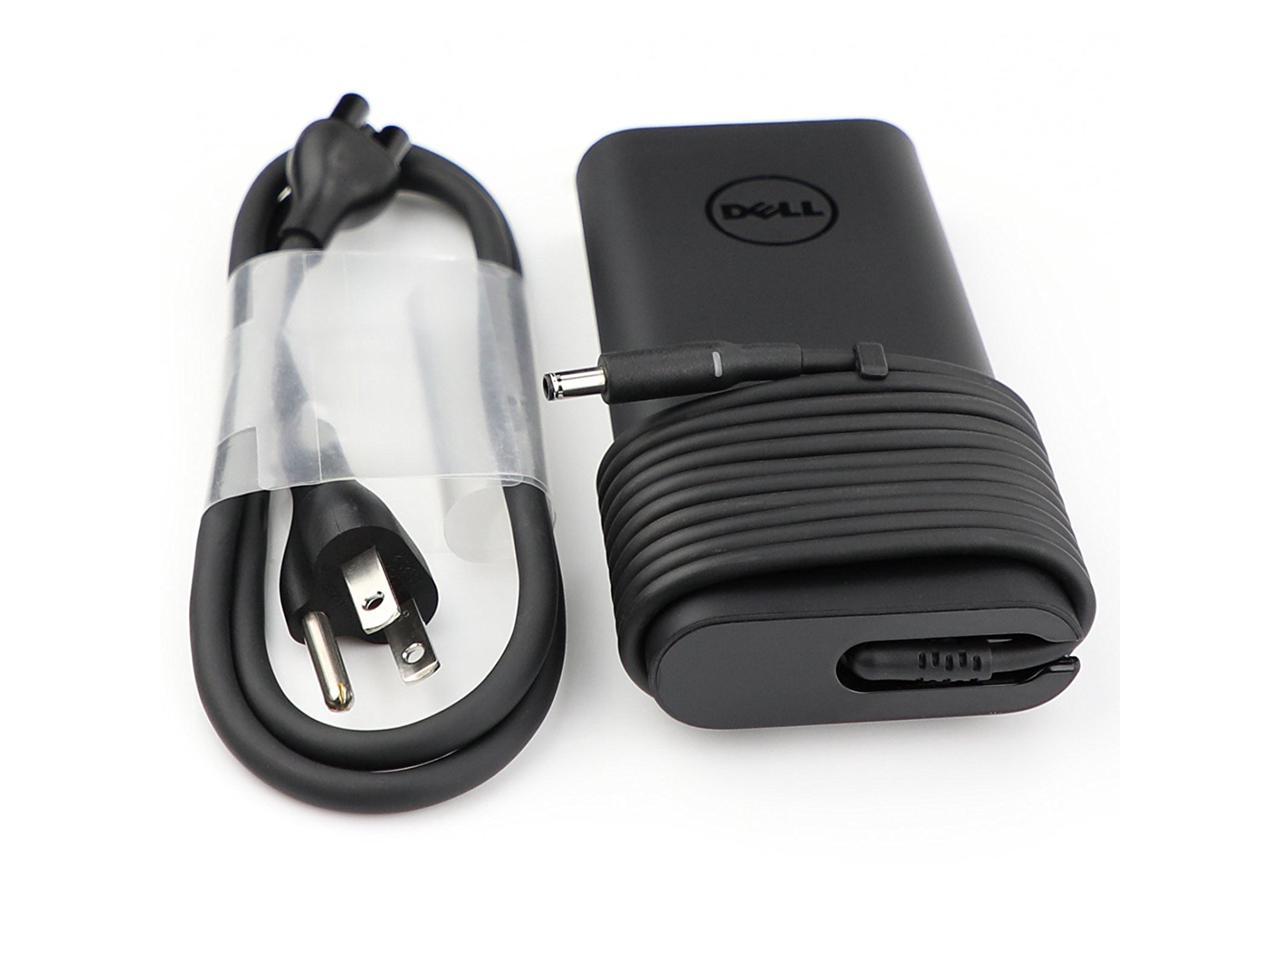 New 130W AC Charger for Dell XPS 15 9530 9550 9560 7590 DA130PM130 LA130PM130 Laptop AC Adapter Power Supply Cord